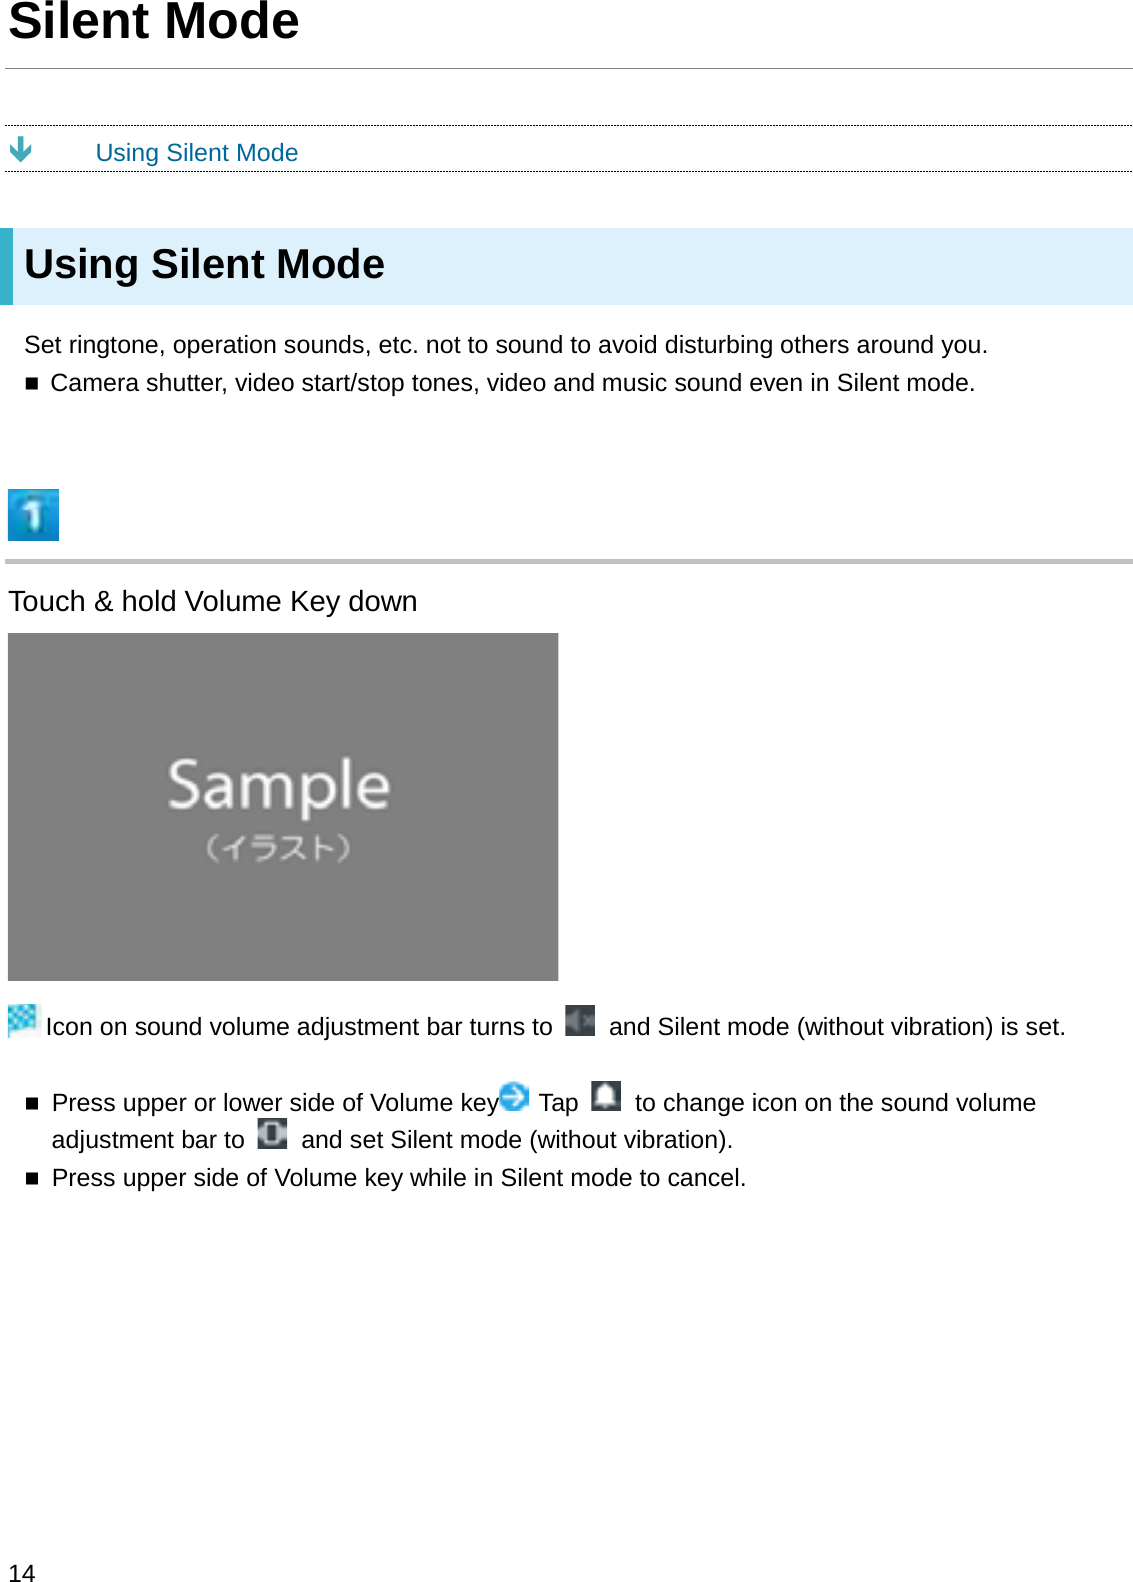 Silent ModeÐUsing Silent ModeUsing Silent ModeSet ringtone, operation sounds, etc. not to sound to avoid disturbing others around you.Camera shutter, video start/stop tones, video and music sound even in Silent mode.Touch &amp; hold Volume Key downIcon on sound volume adjustment bar turns to  and Silent mode (without vibration) is set.Press upper or lower side of Volume key Tap  to change icon on the sound volume adjustment bar to  and set Silent mode (without vibration).Press upper side of Volume key while in Silent mode to cancel.14